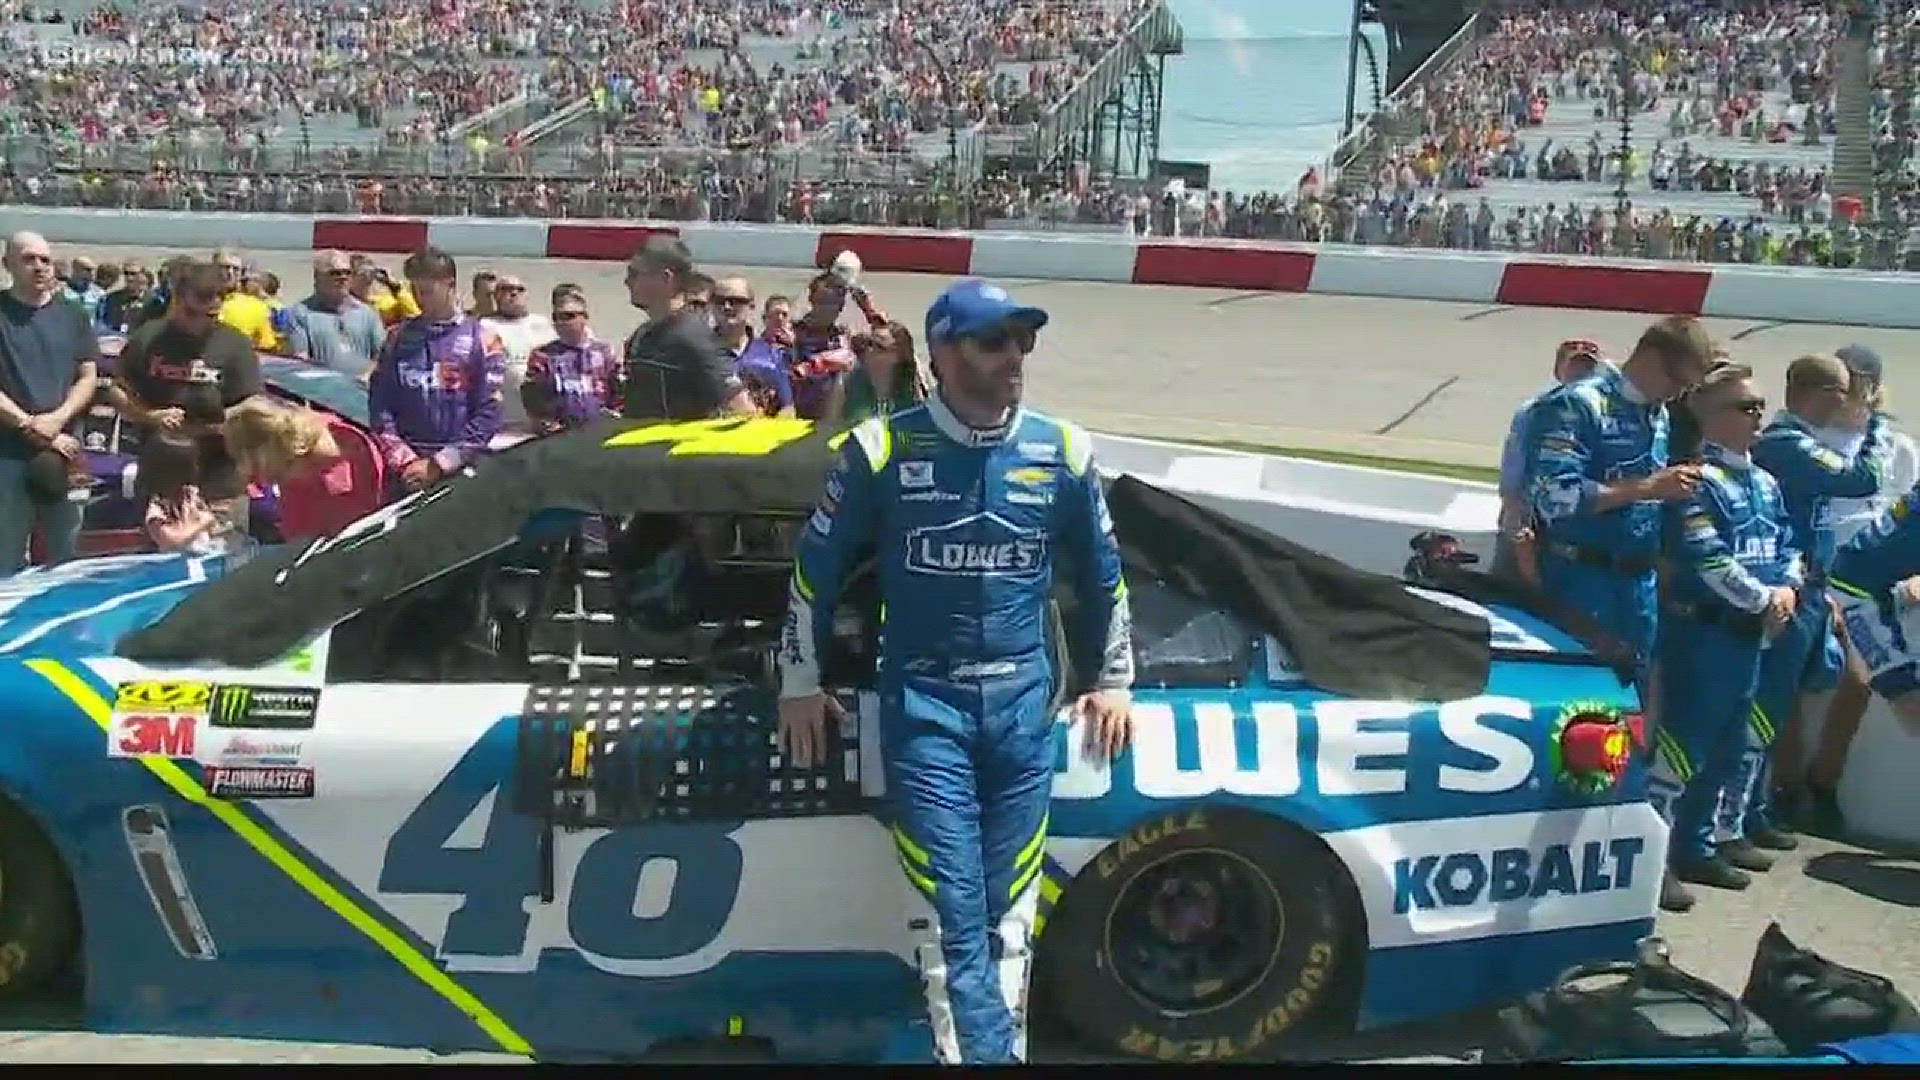 It's been a great marriage, but it's coming to an end. Lowe's will no longer sponsor Jimmie Johnson and the #48 car after 2018.